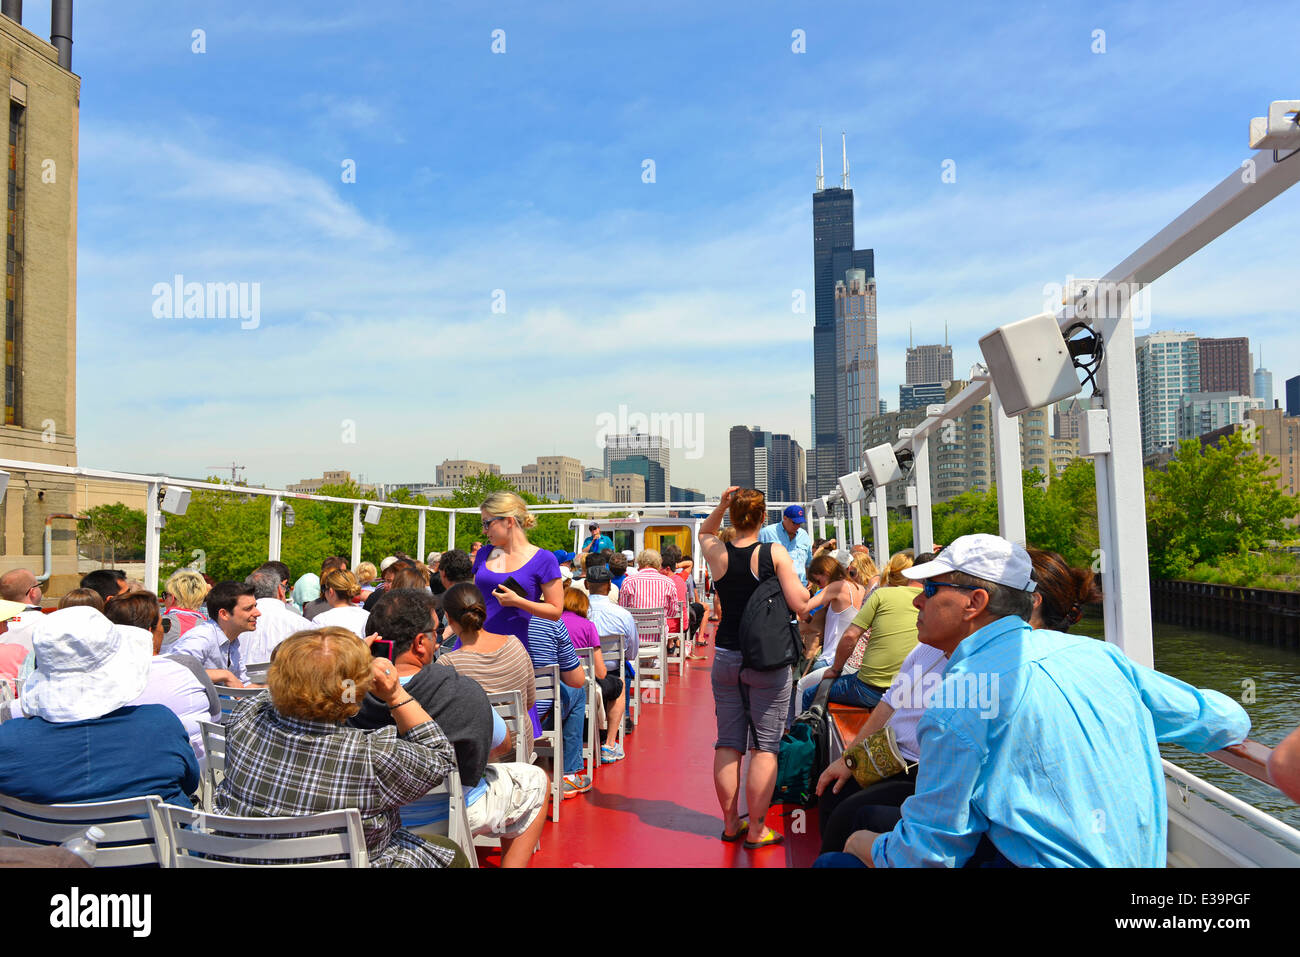 River Cruise along the Chicago river, City Tour, Tourists enjoying a narrated city tour, Sightseeing; Chicago, Illinois, USA Stock Photo